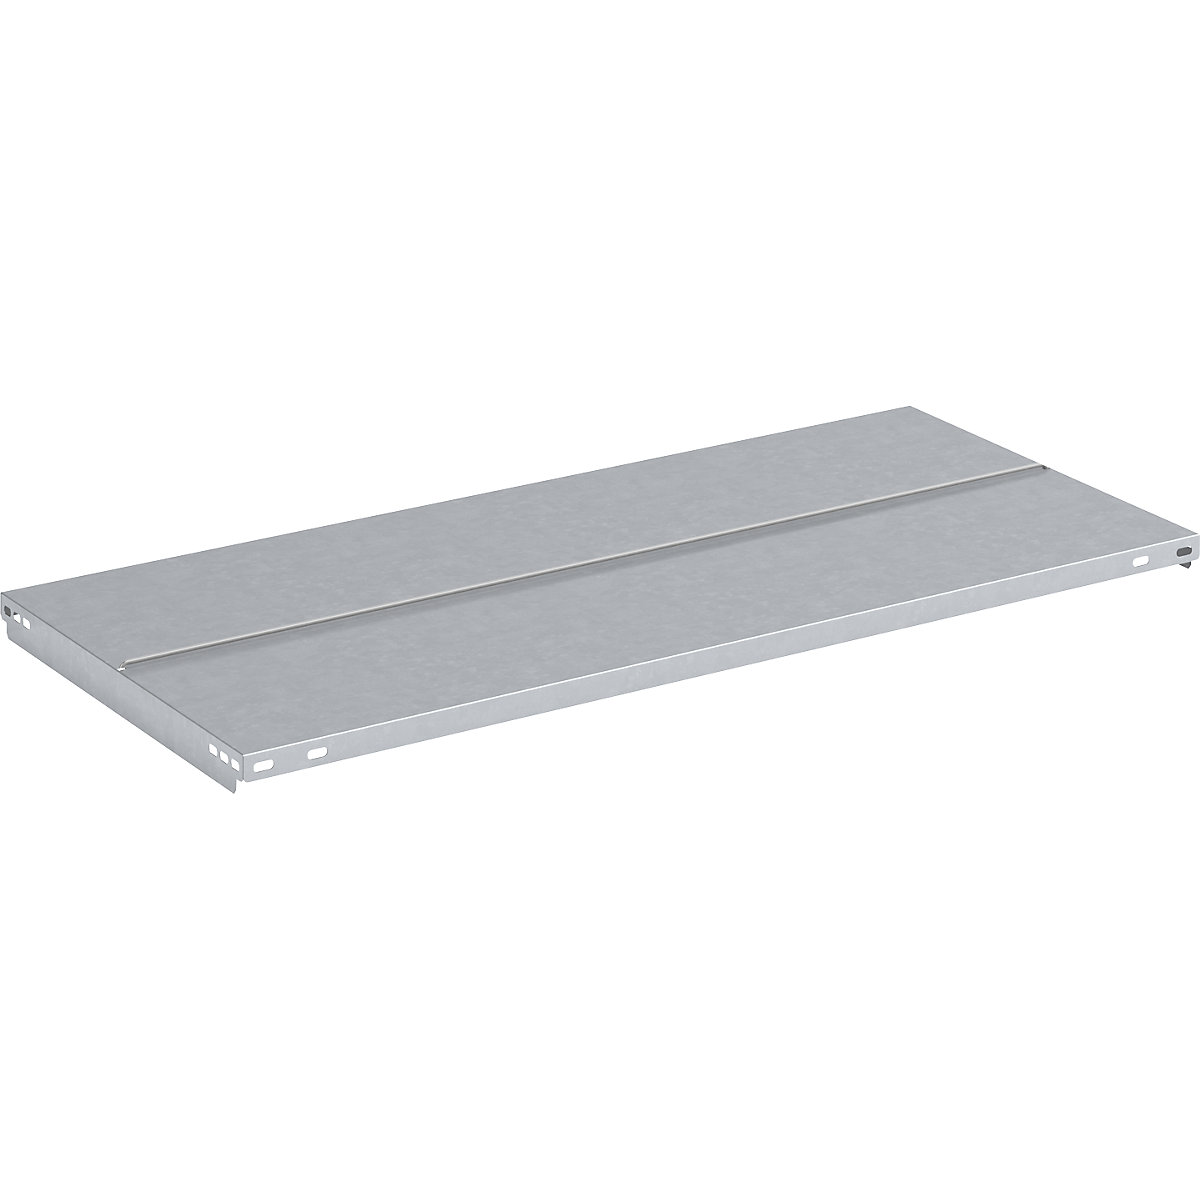 Shelf with supports – hofe, zinc plated, WxD 1000 x 600 mm-3